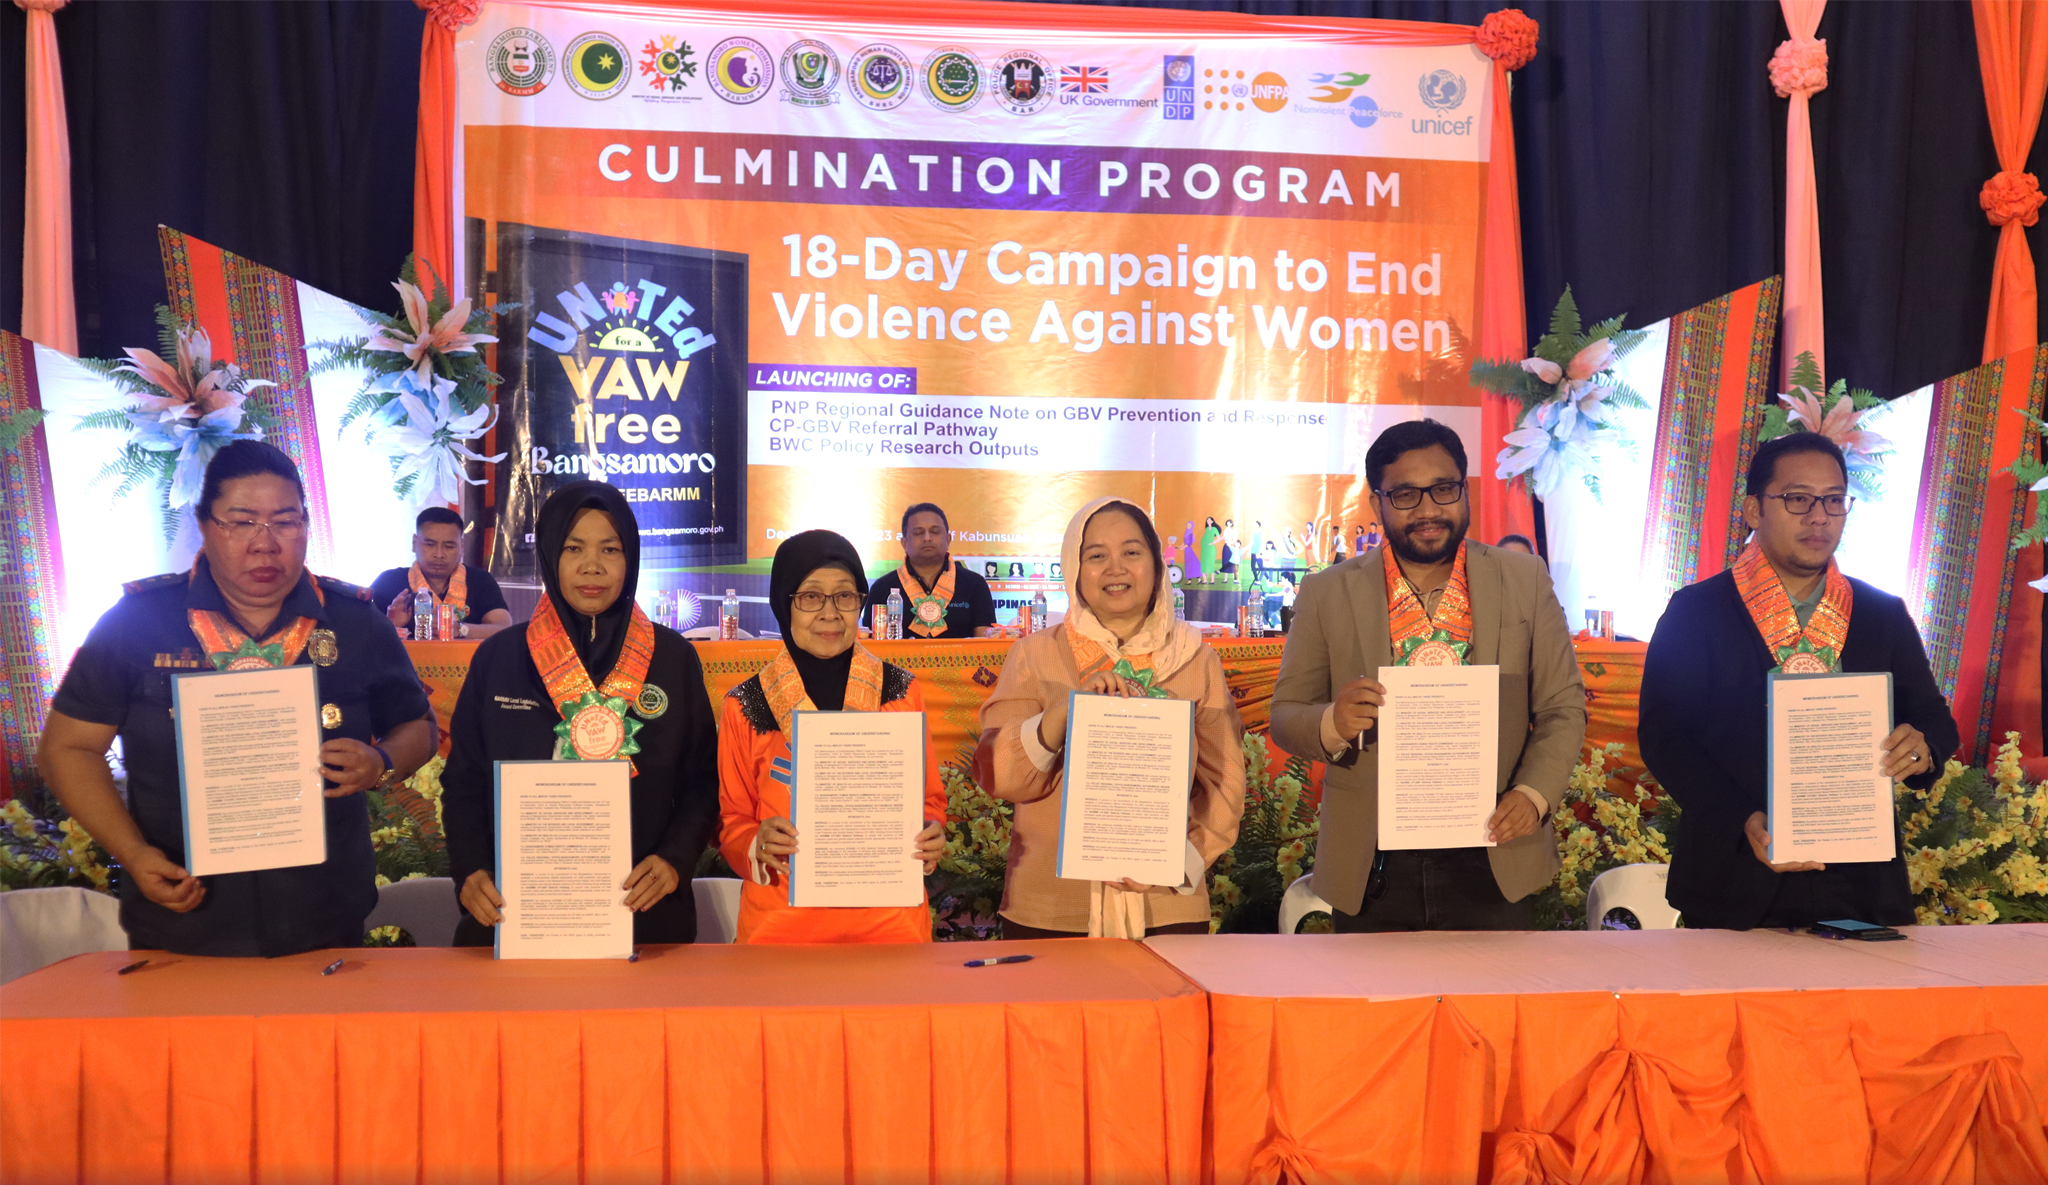 Culmination of the 18-day Campaign To End Violence Against Women (VAW)